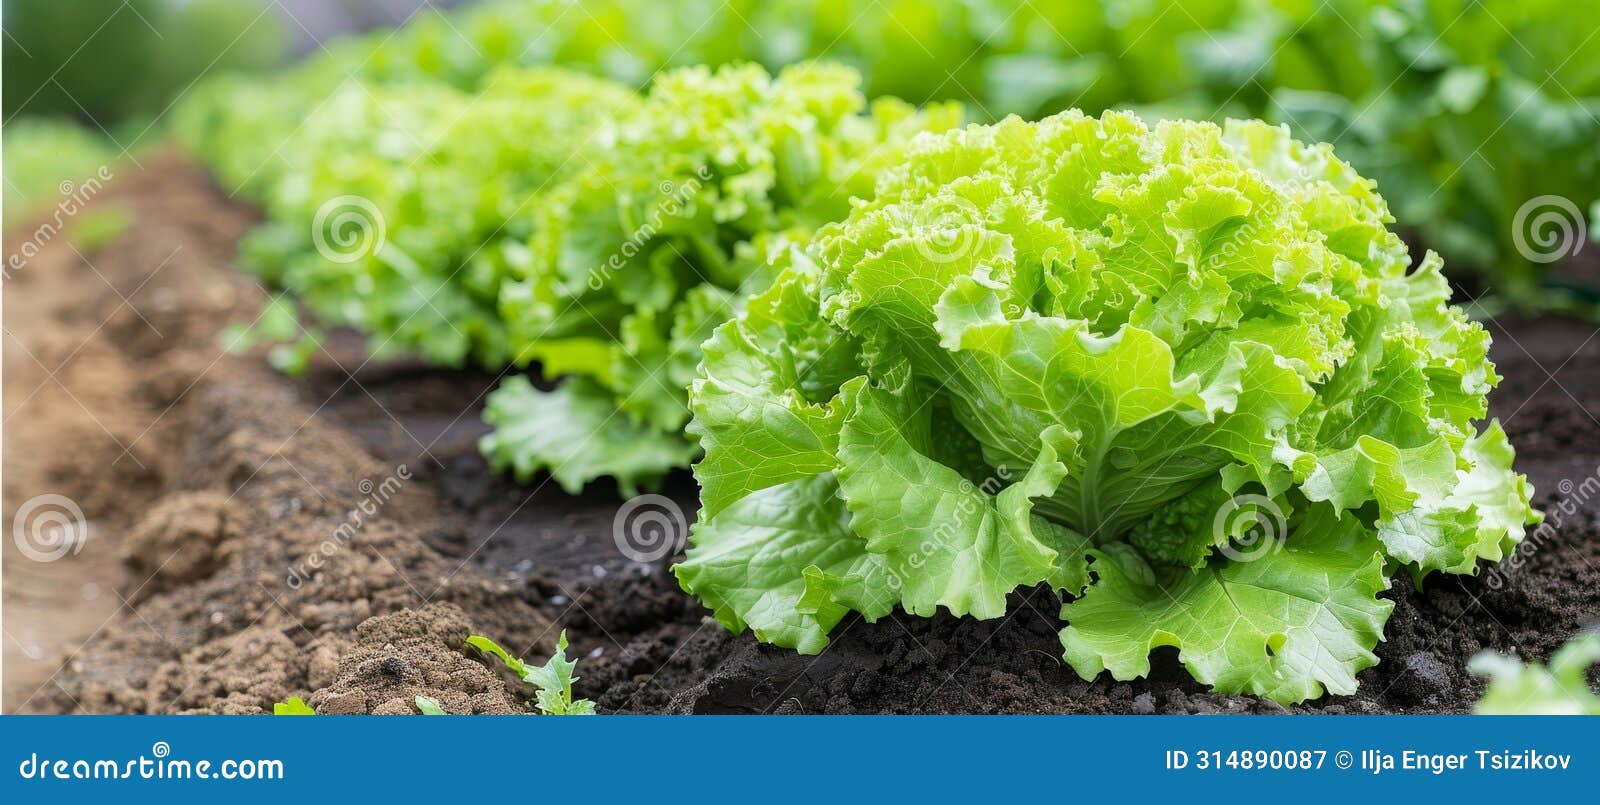 lush green lettuce thriving in a controlled greenhouse environment, growing vibrantly